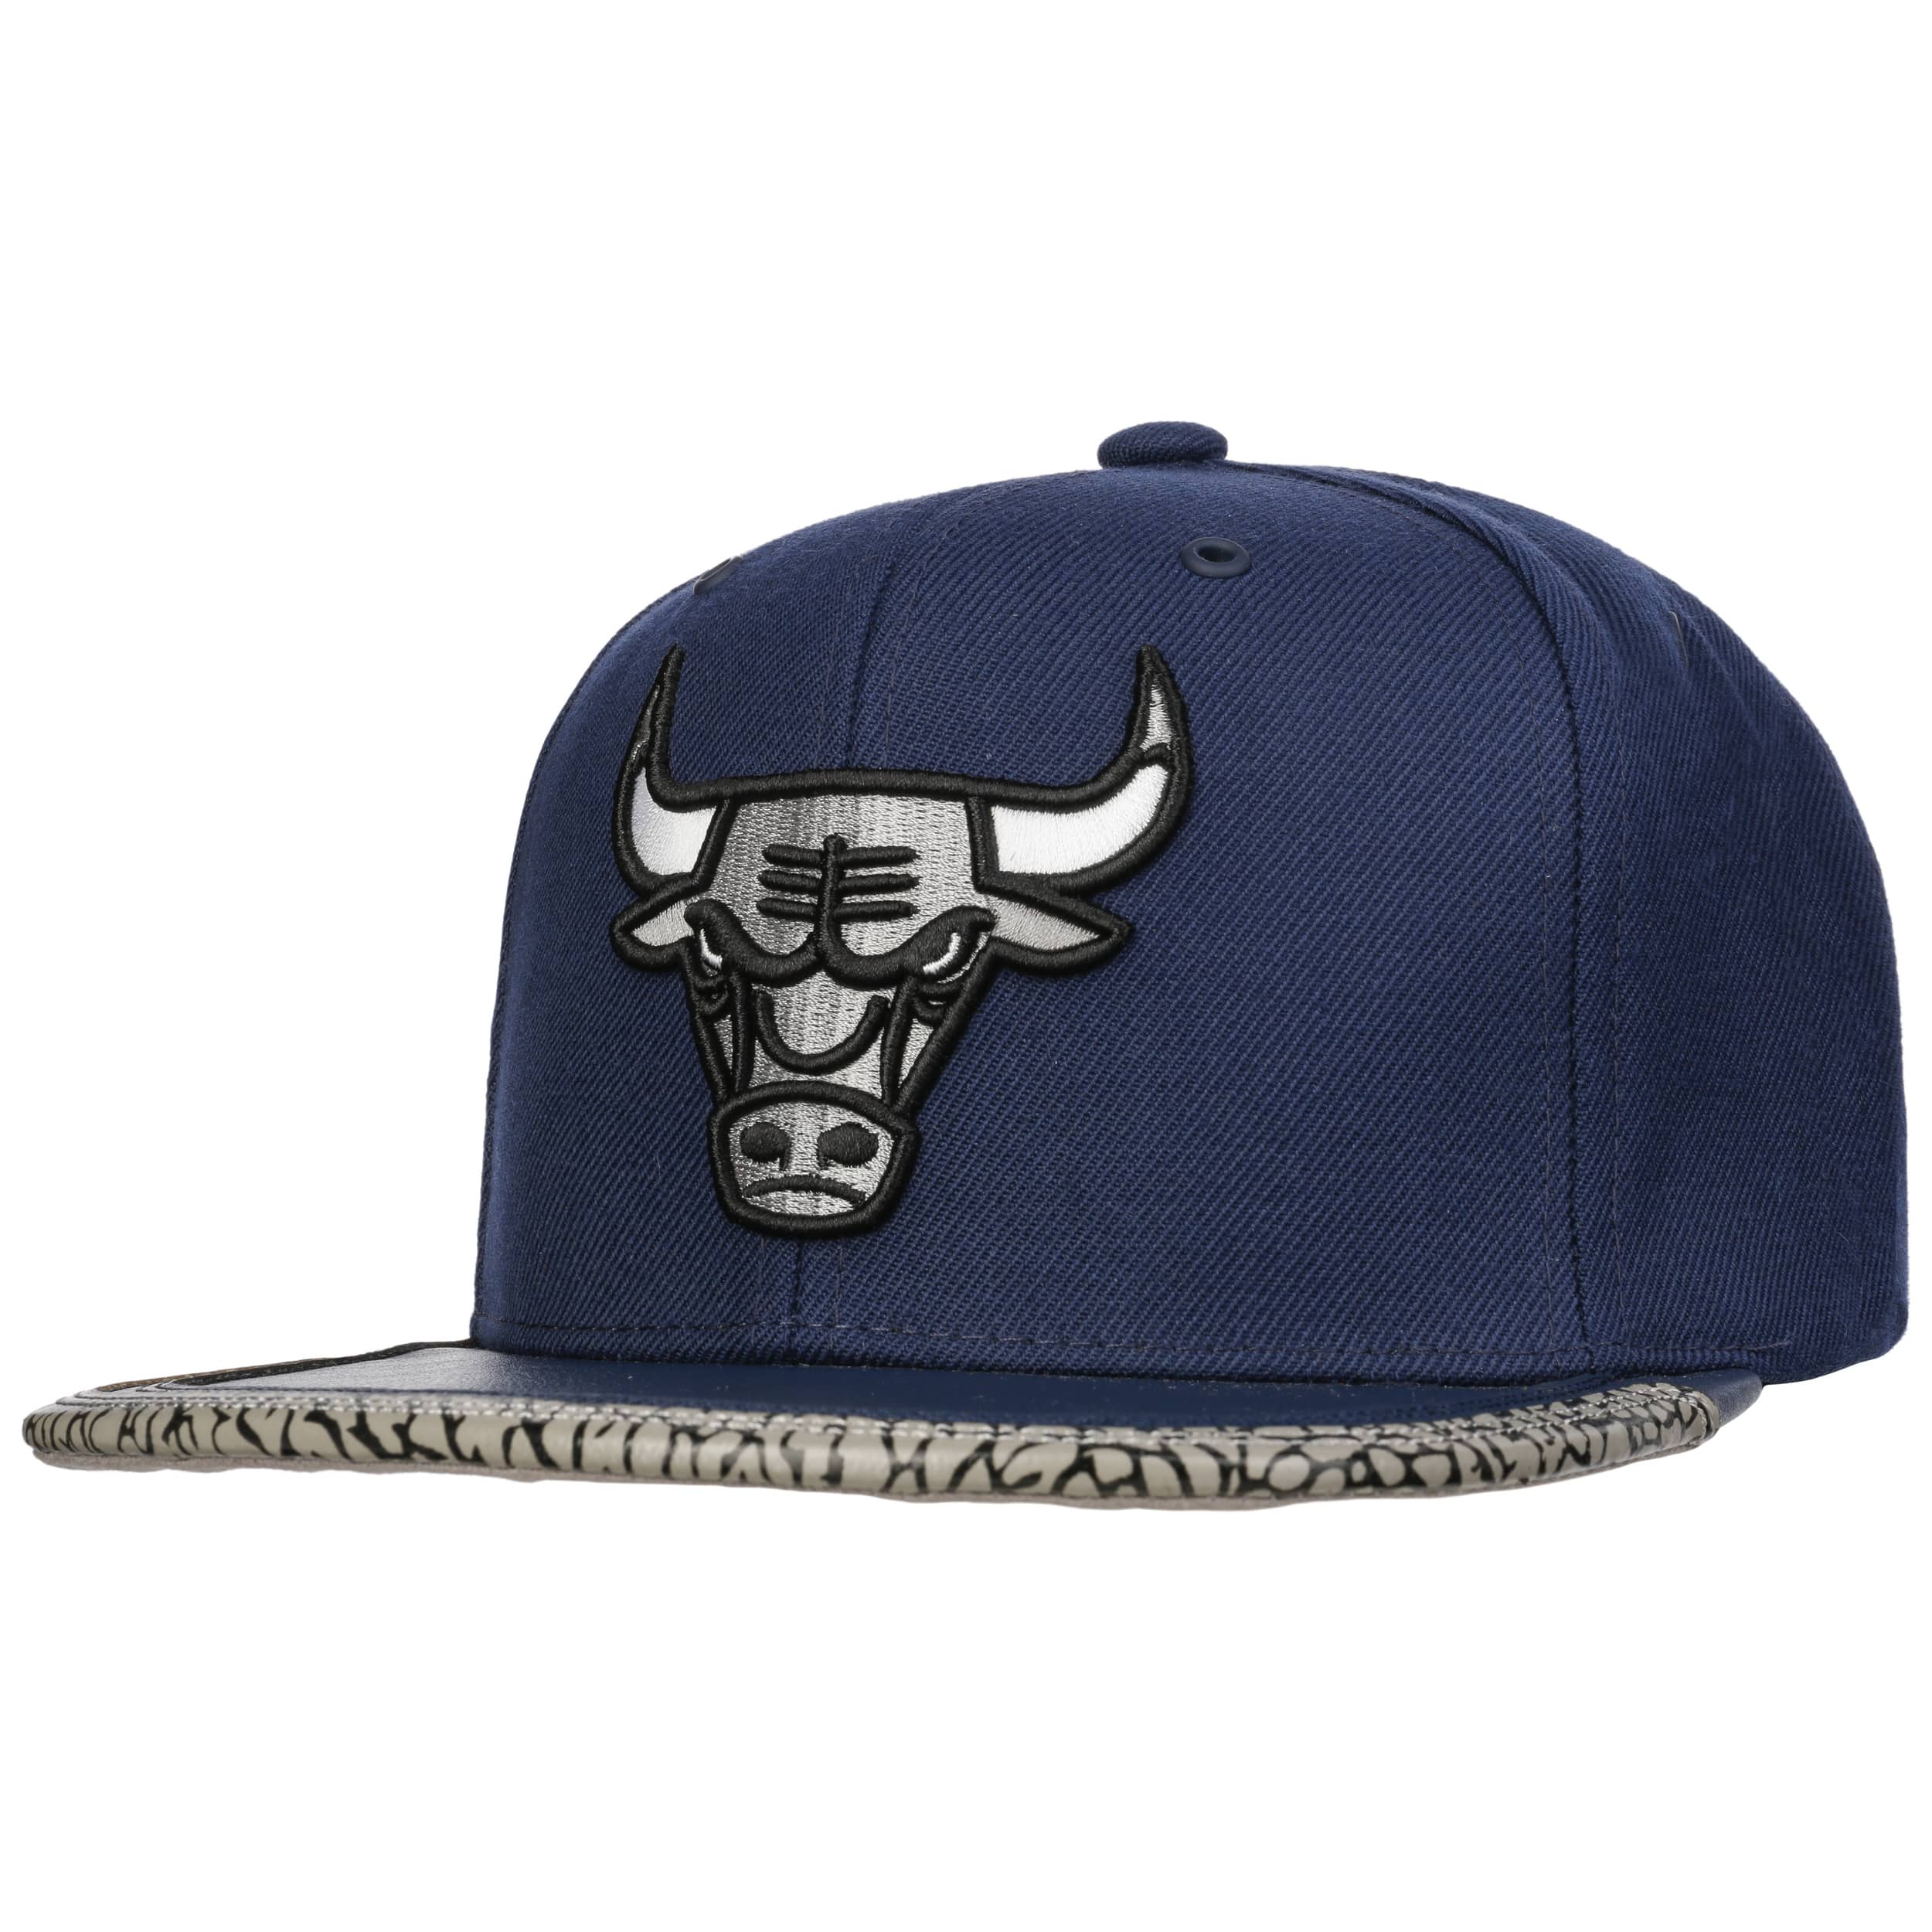 Chicago Snapback Pet by Mitchell & Ness - 39,95 €